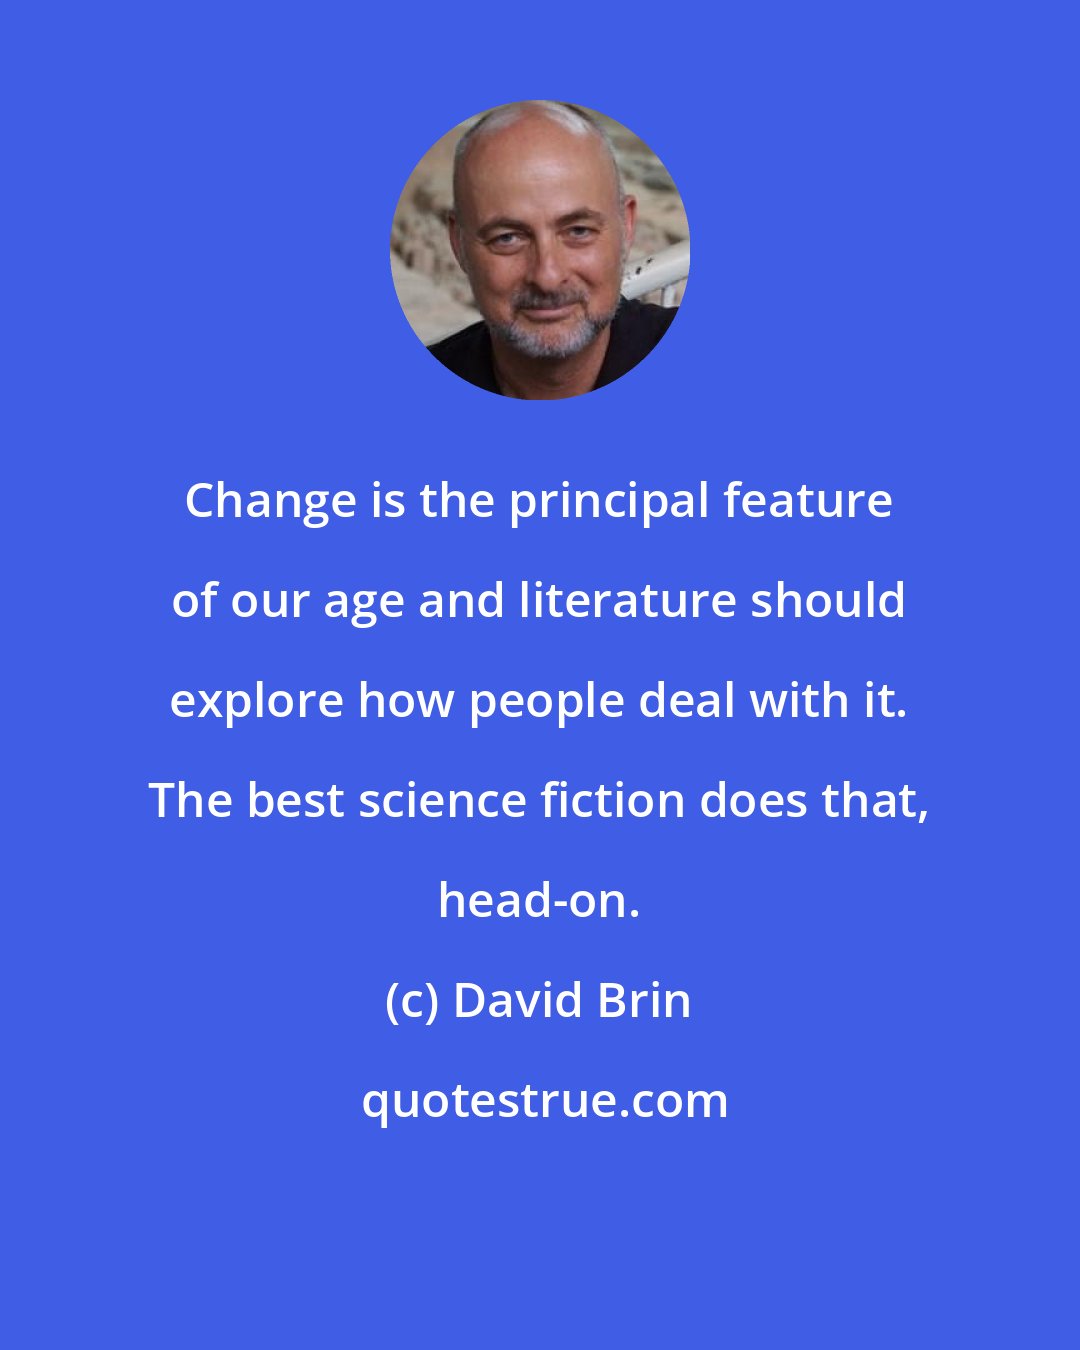 David Brin: Change is the principal feature of our age and literature should explore how people deal with it. The best science fiction does that, head-on.